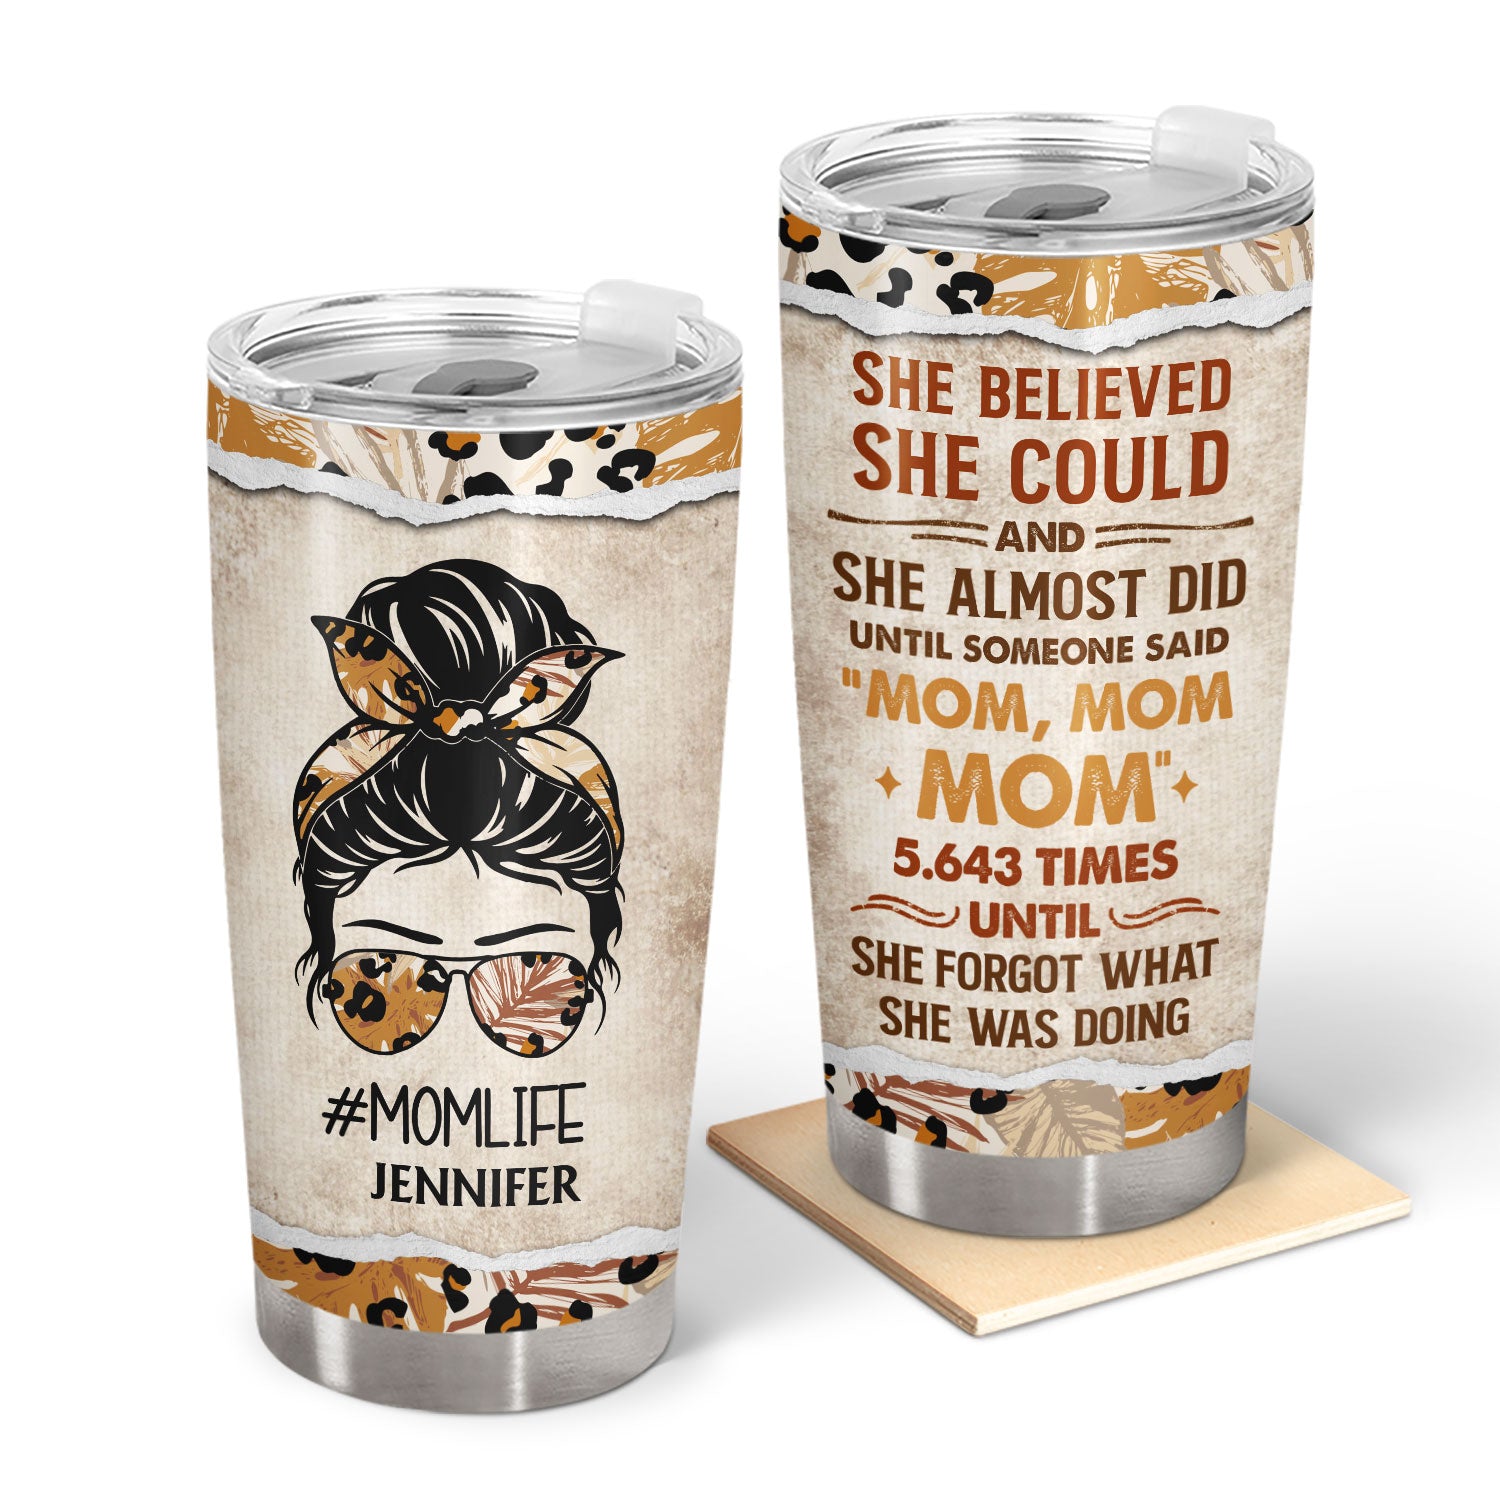 She Believed She Could And She Almost Did - Loving, Birthday Gift For Mom, Mum, Nana, Mother, Grandma - Personalized Tumbler